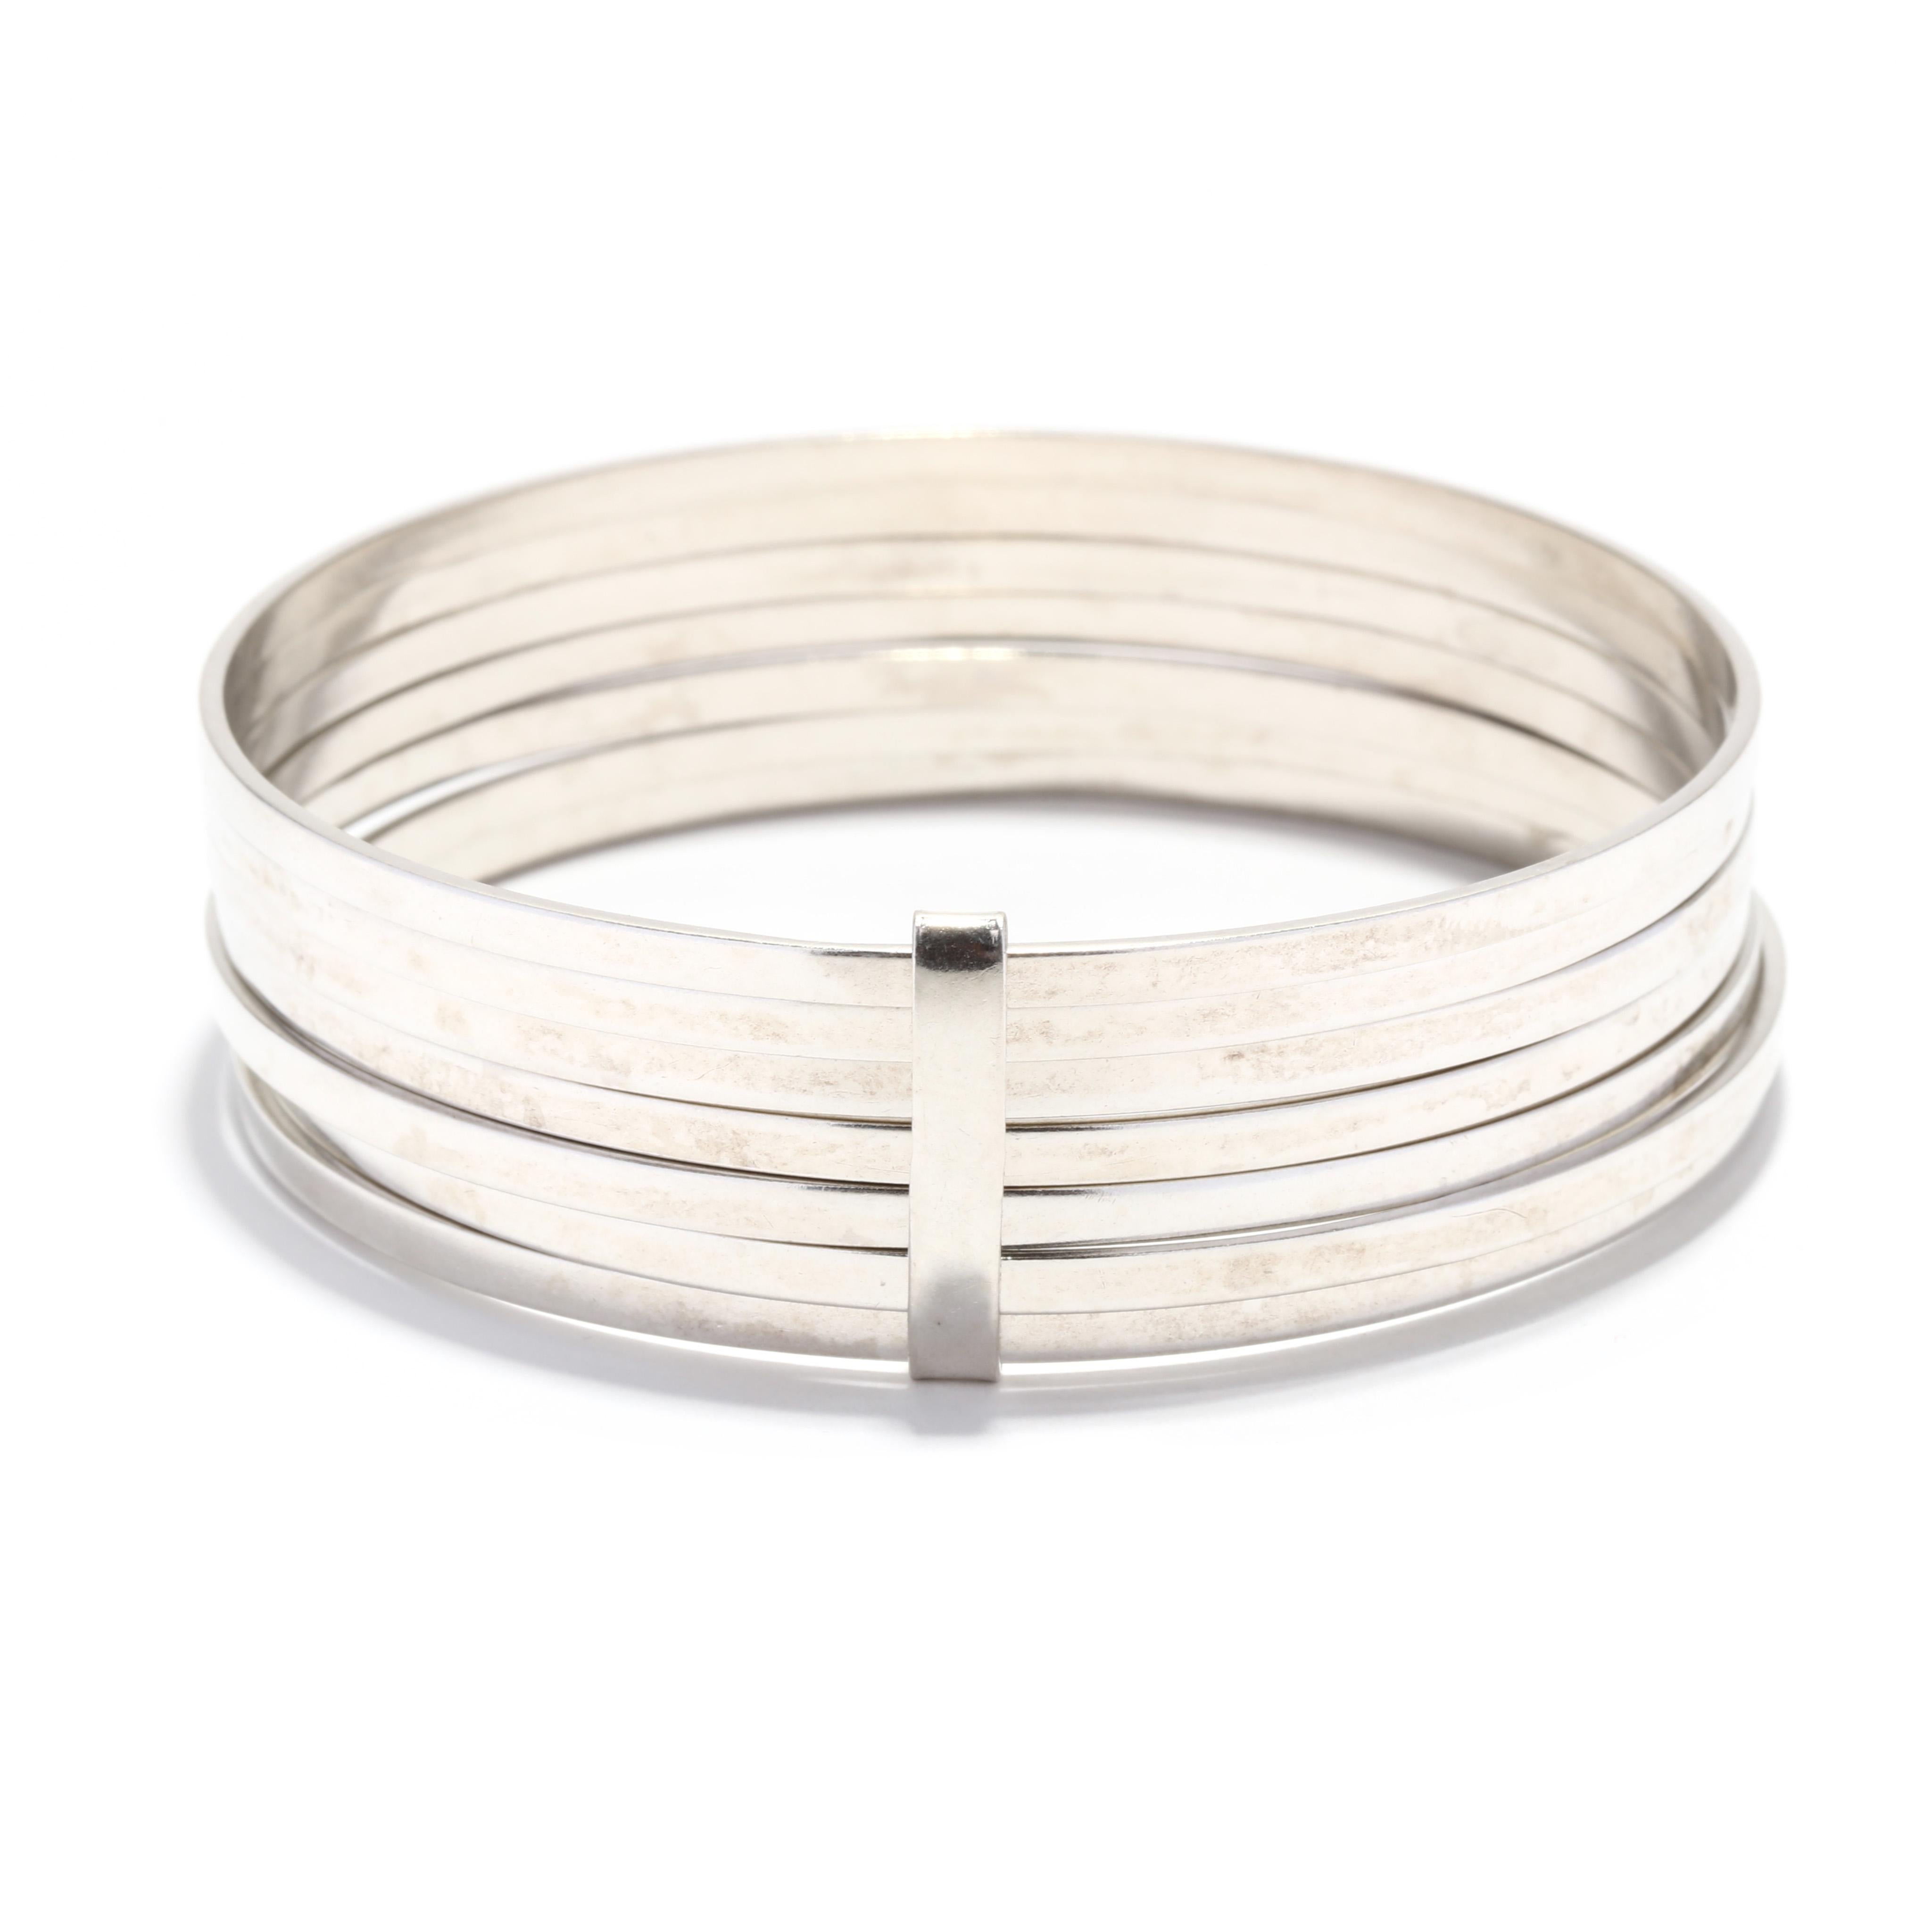 A sterling silver stacked bangle bracelets set. This wide bracelet is comprised of seven sterling bangles, joined by a single spacer bar. It is stamped 925.

Width: 3/4 in.

Interior Circumference: 8.5 inches

Weight: 36.5 dwt. / 56.76